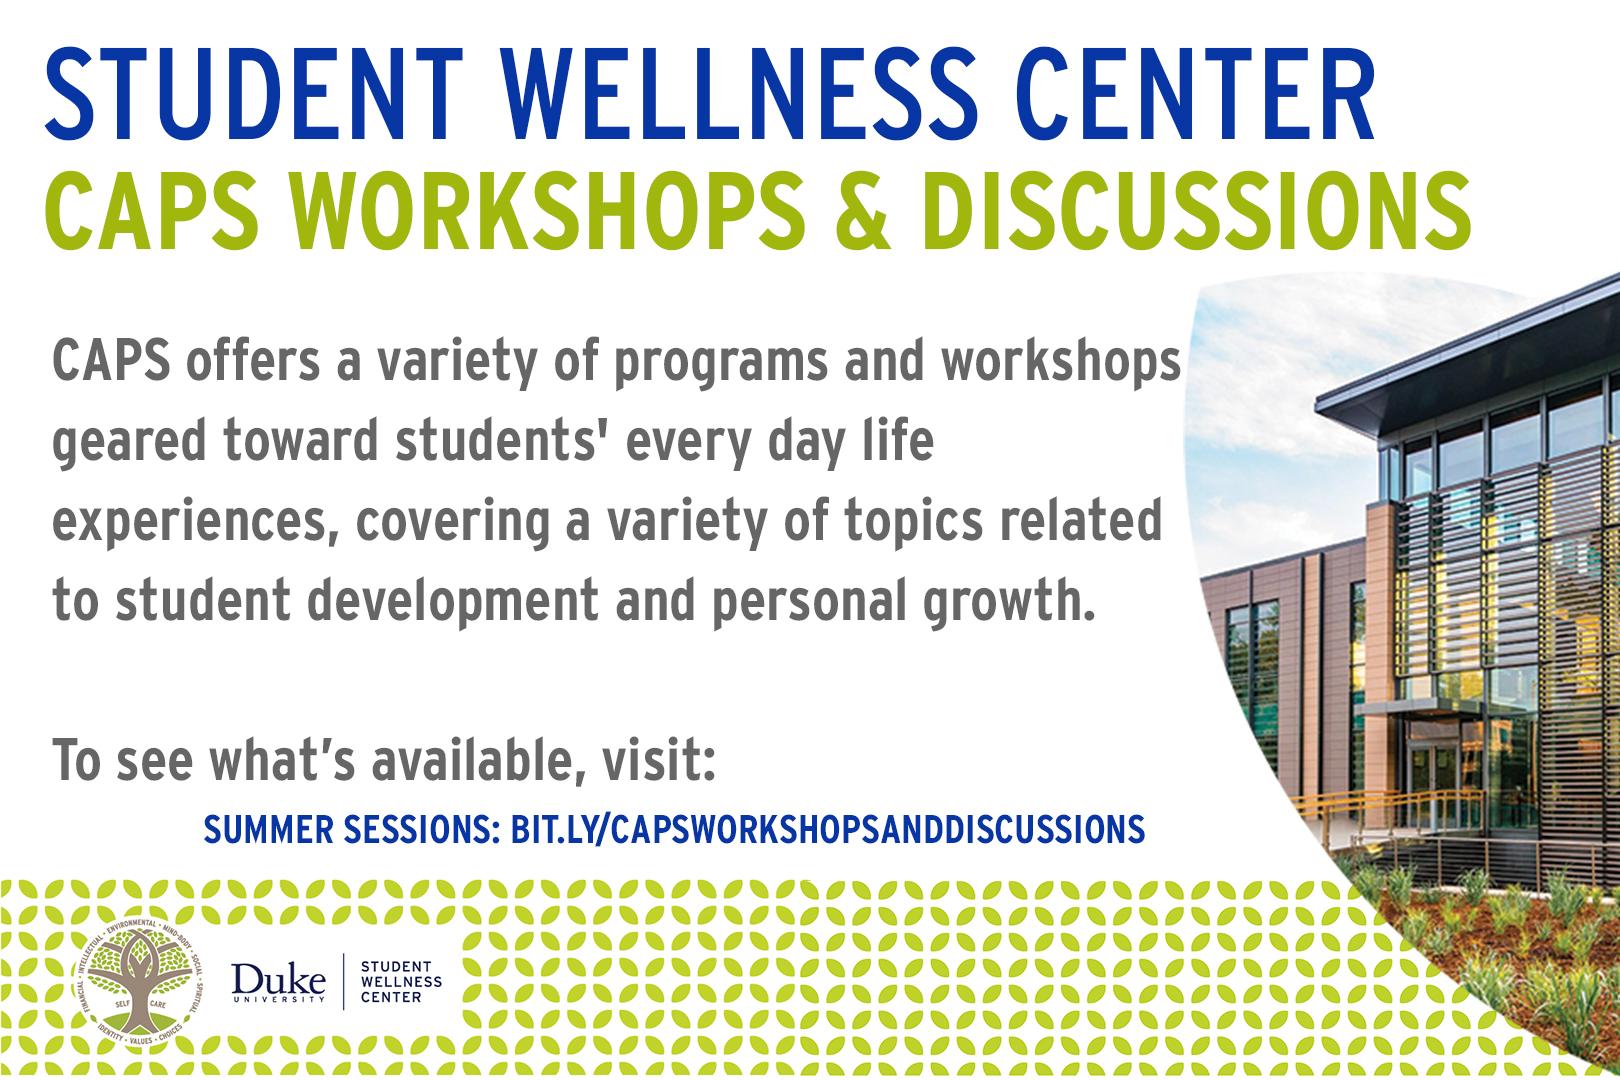  Student Wellness Center CAPS Workshops and Discussions CAPS offers a variety of programs and workshops geared toward students&#39; every day life experiences, covering a variety of topics related to student development  and personal growth. To see what&#39;s available, visit: summer sessions: bit.ly/capsworkshopsanddiscussions. Picture of student wellness center.